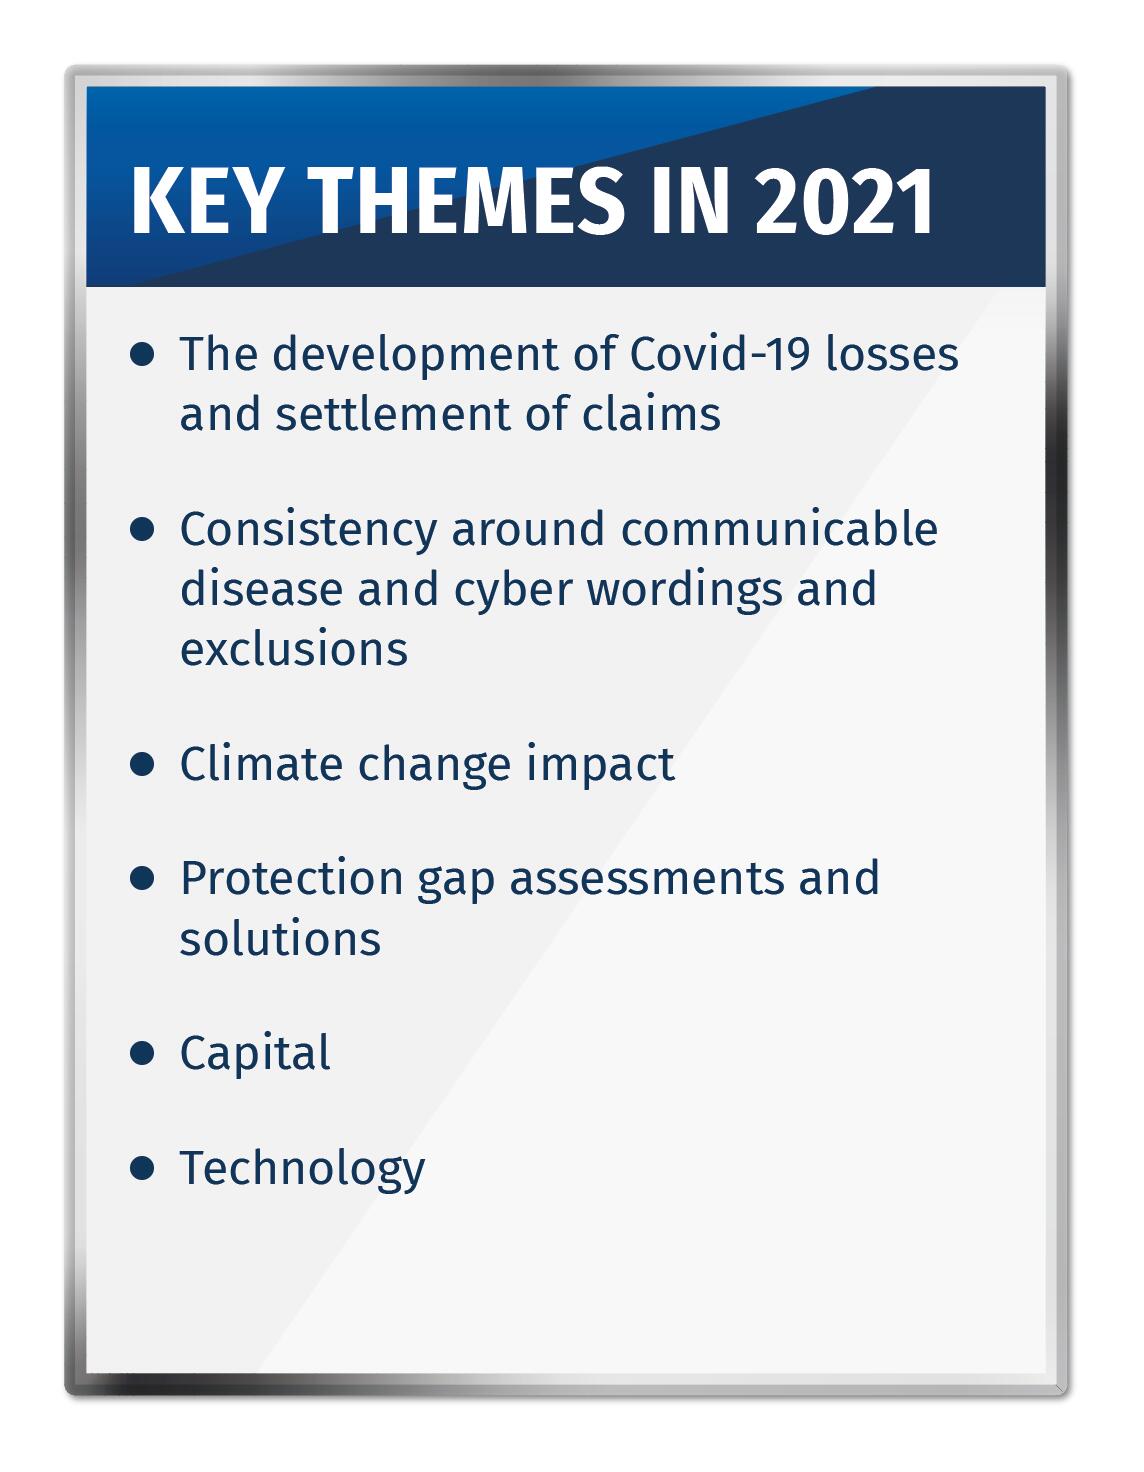 Key themes in 2021